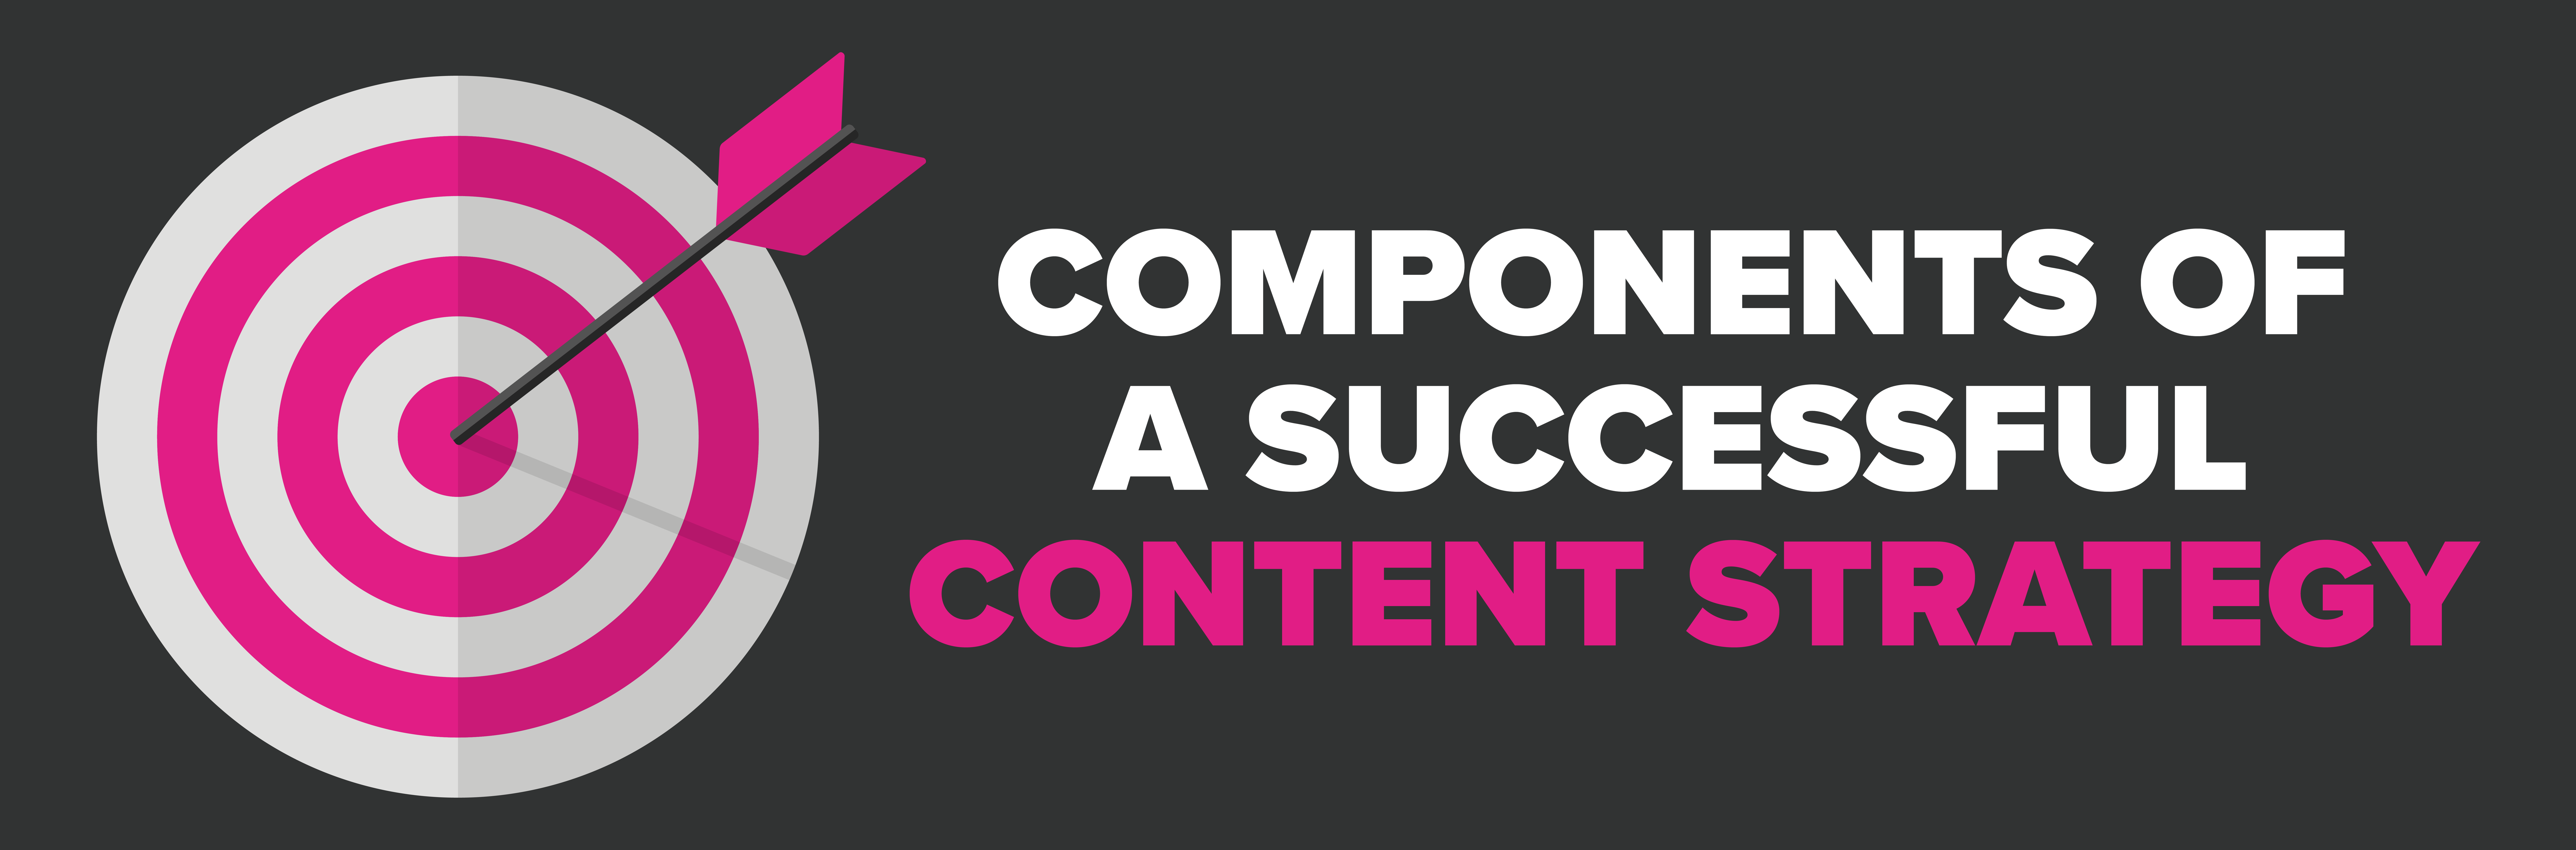 Three components for successful content marketing